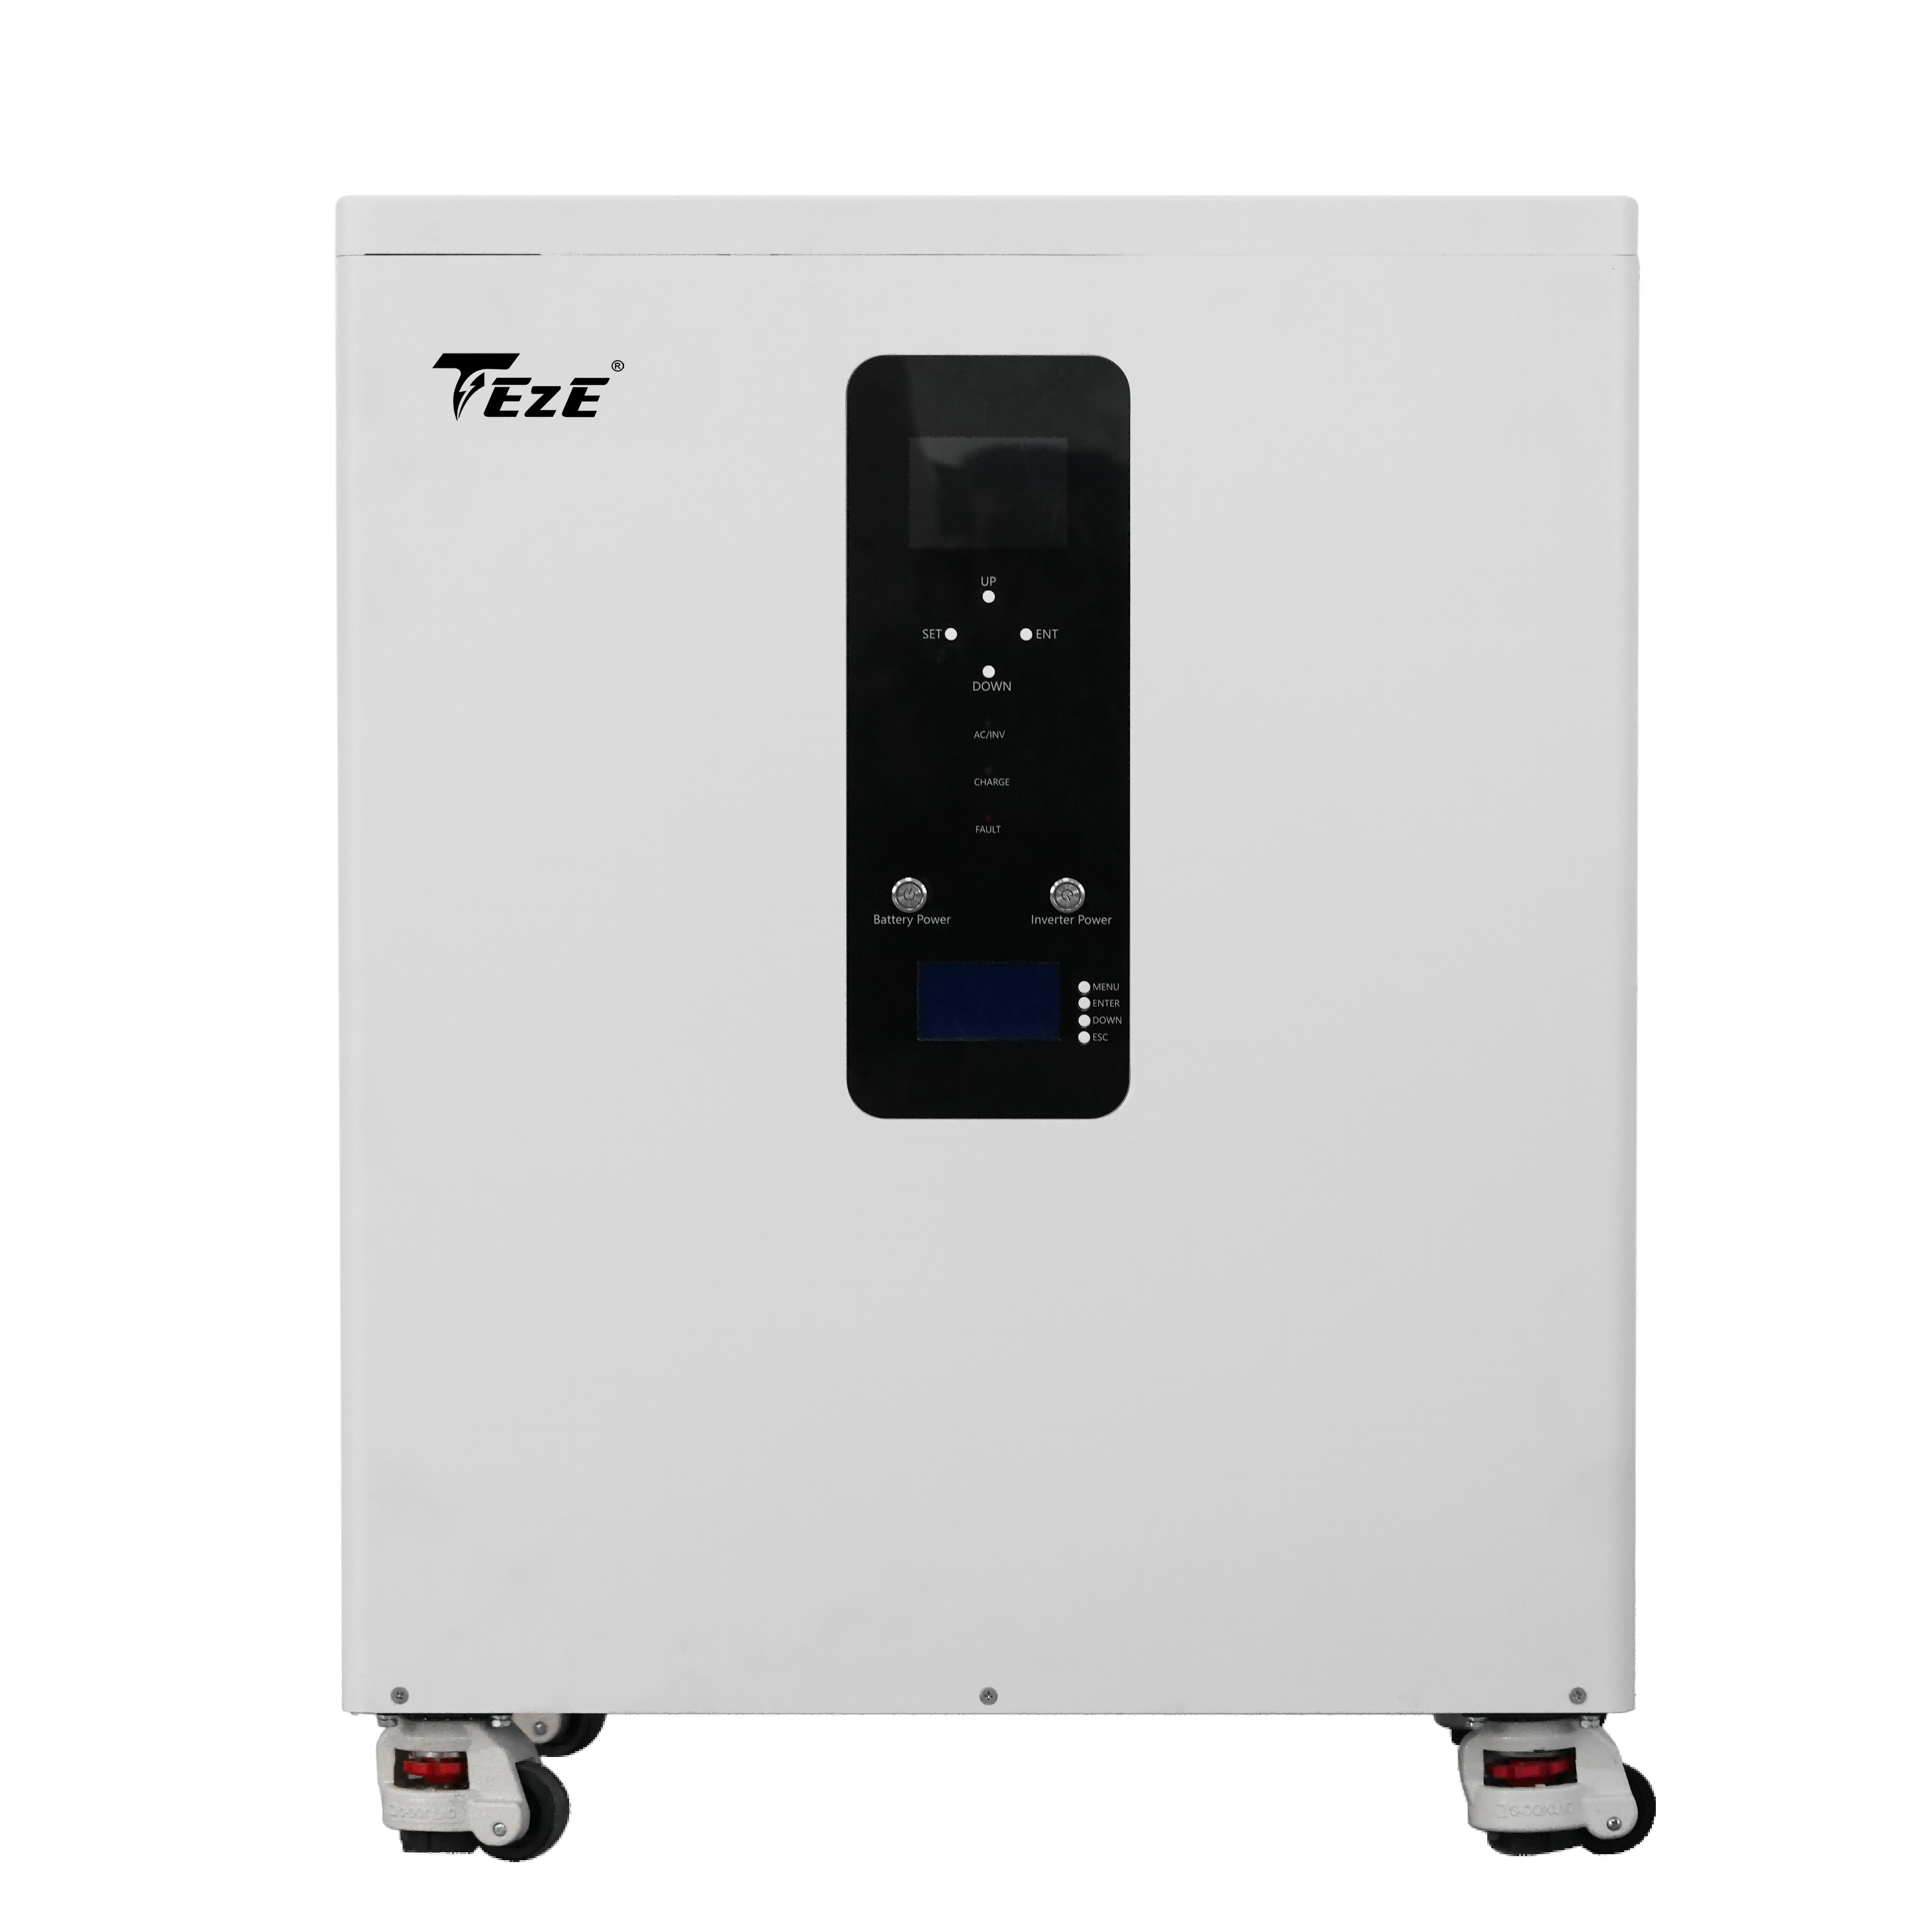 TezePower 51.2V 300Ah All in One 15kWh LiFePO4 Battery Mobile ESS with Active Balancer, Built-in BMS, MPPT, 10kw Hybrid Inverter